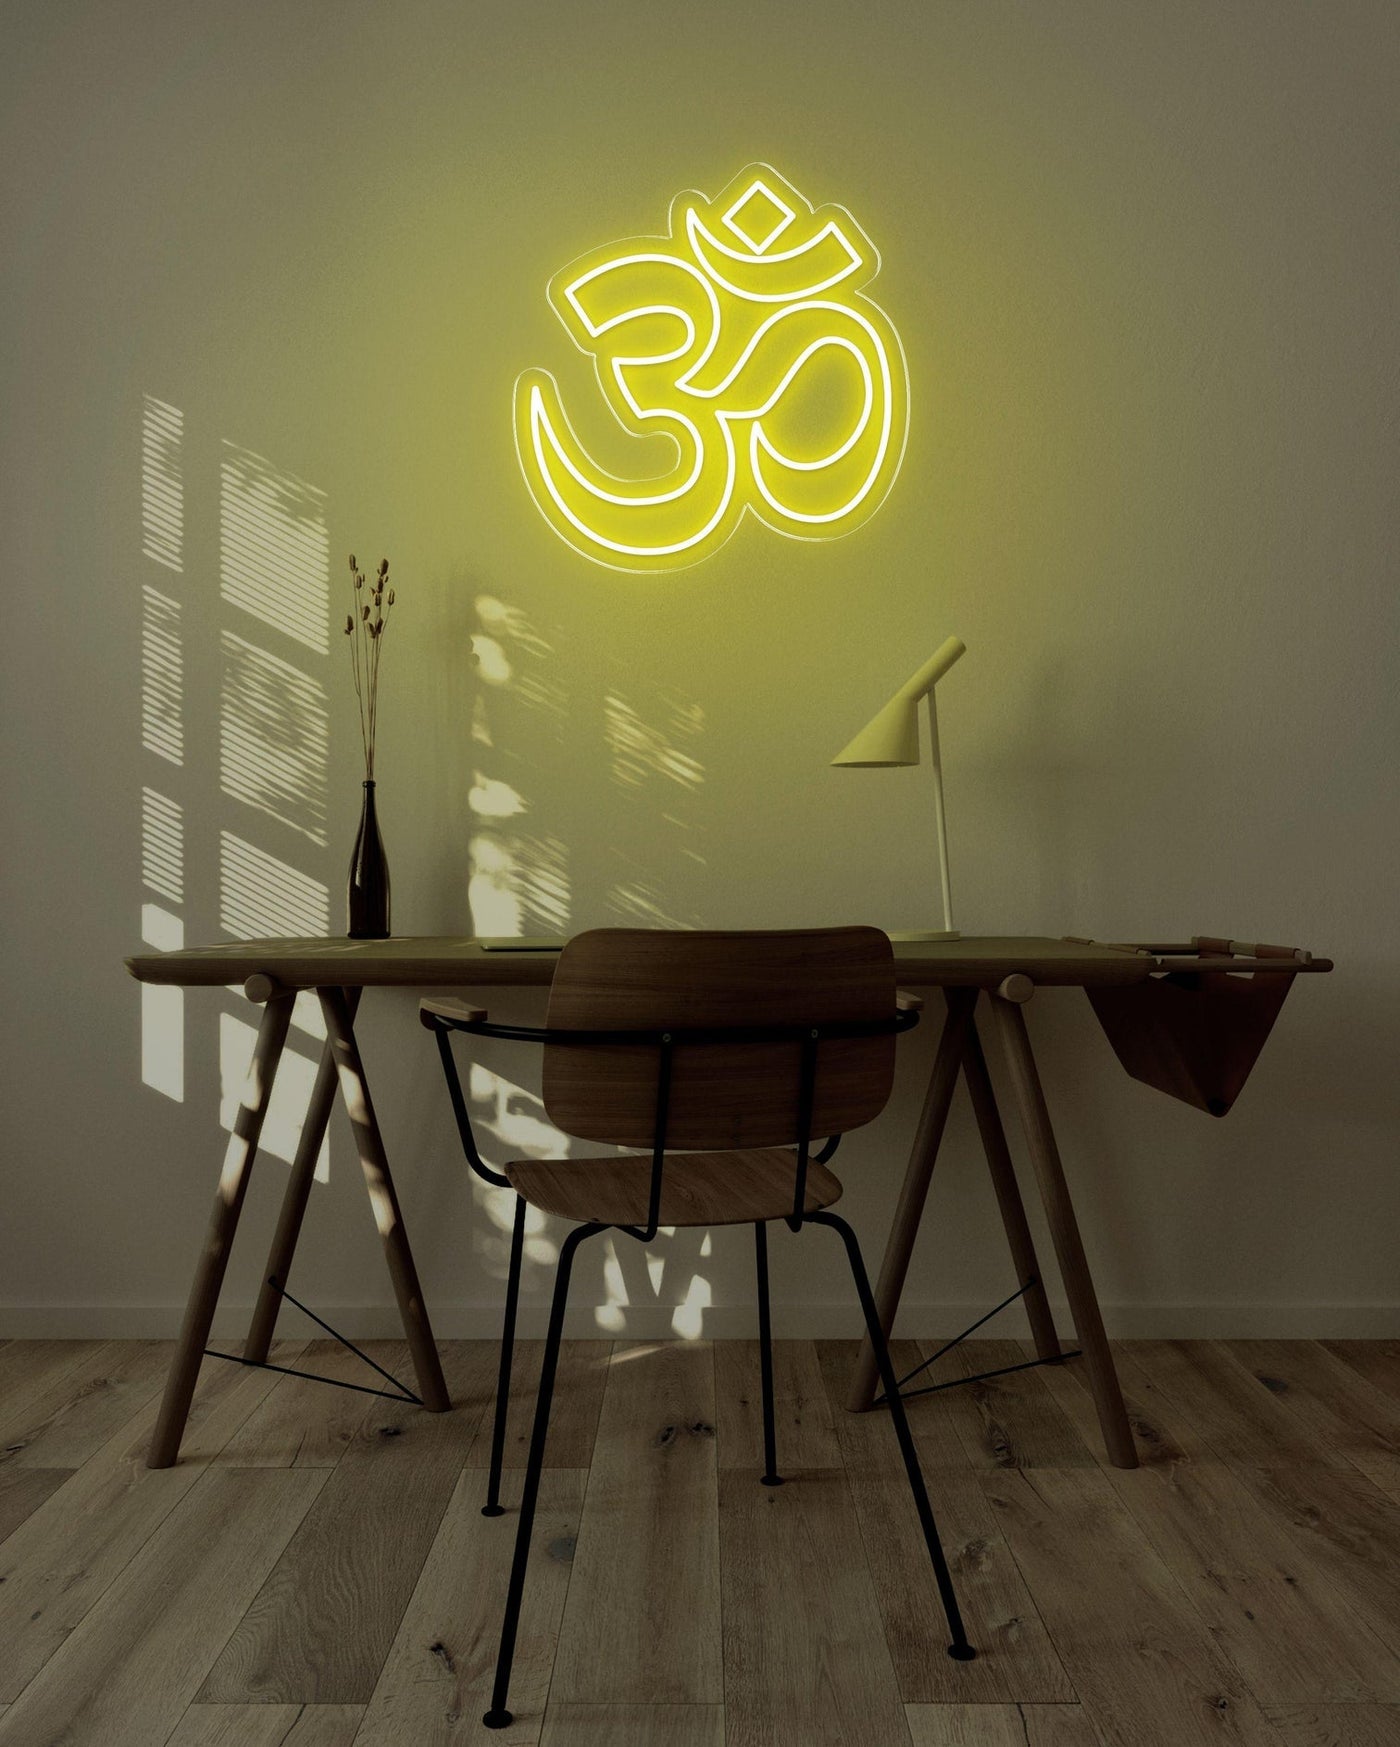 OM LED neon sign - 22inch x 22inchYellow